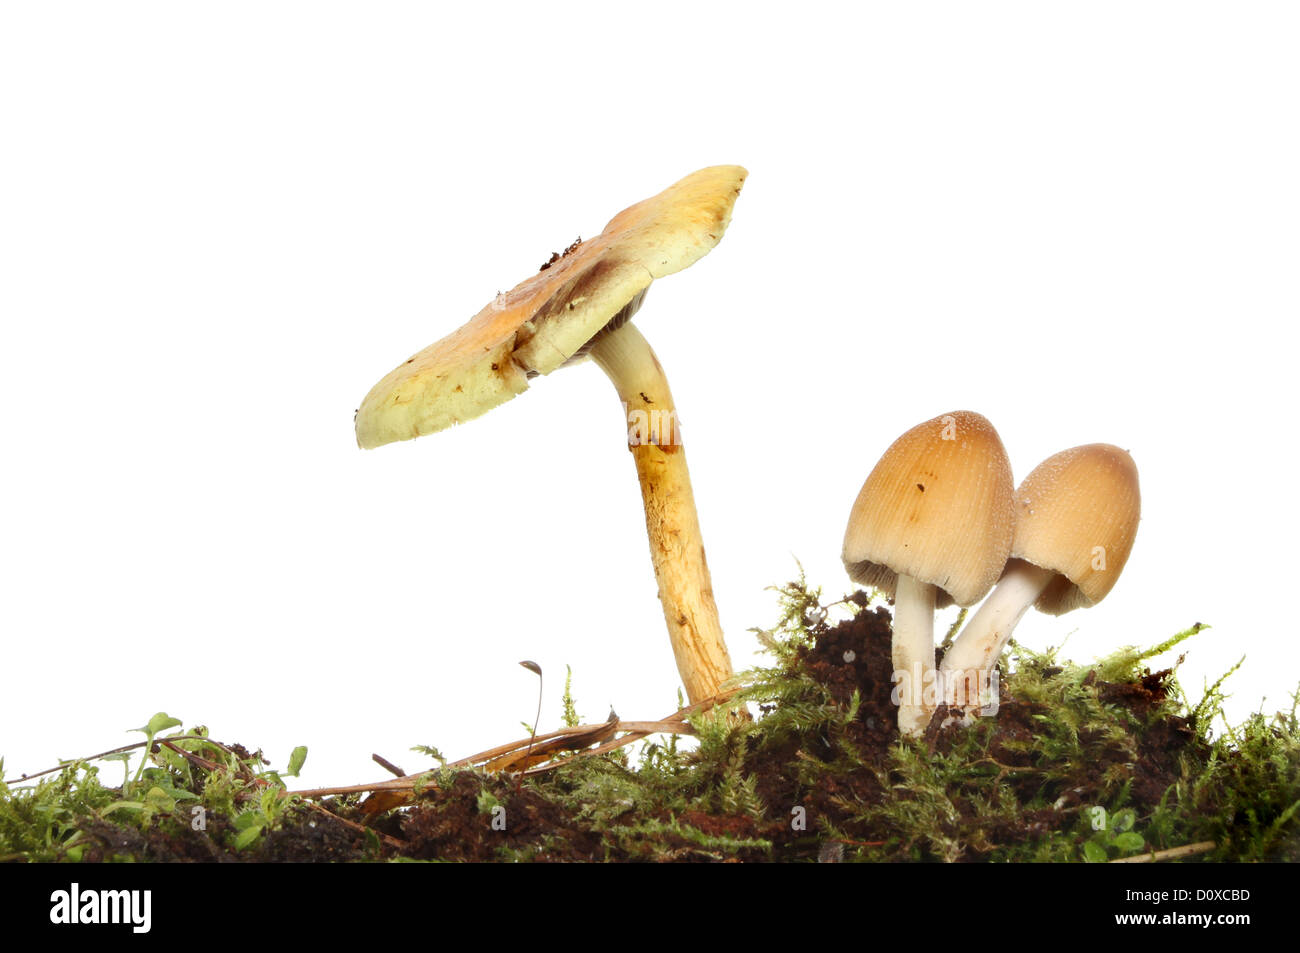 Toadstool fungi growing in moss and leaf litter against a white background Stock Photo